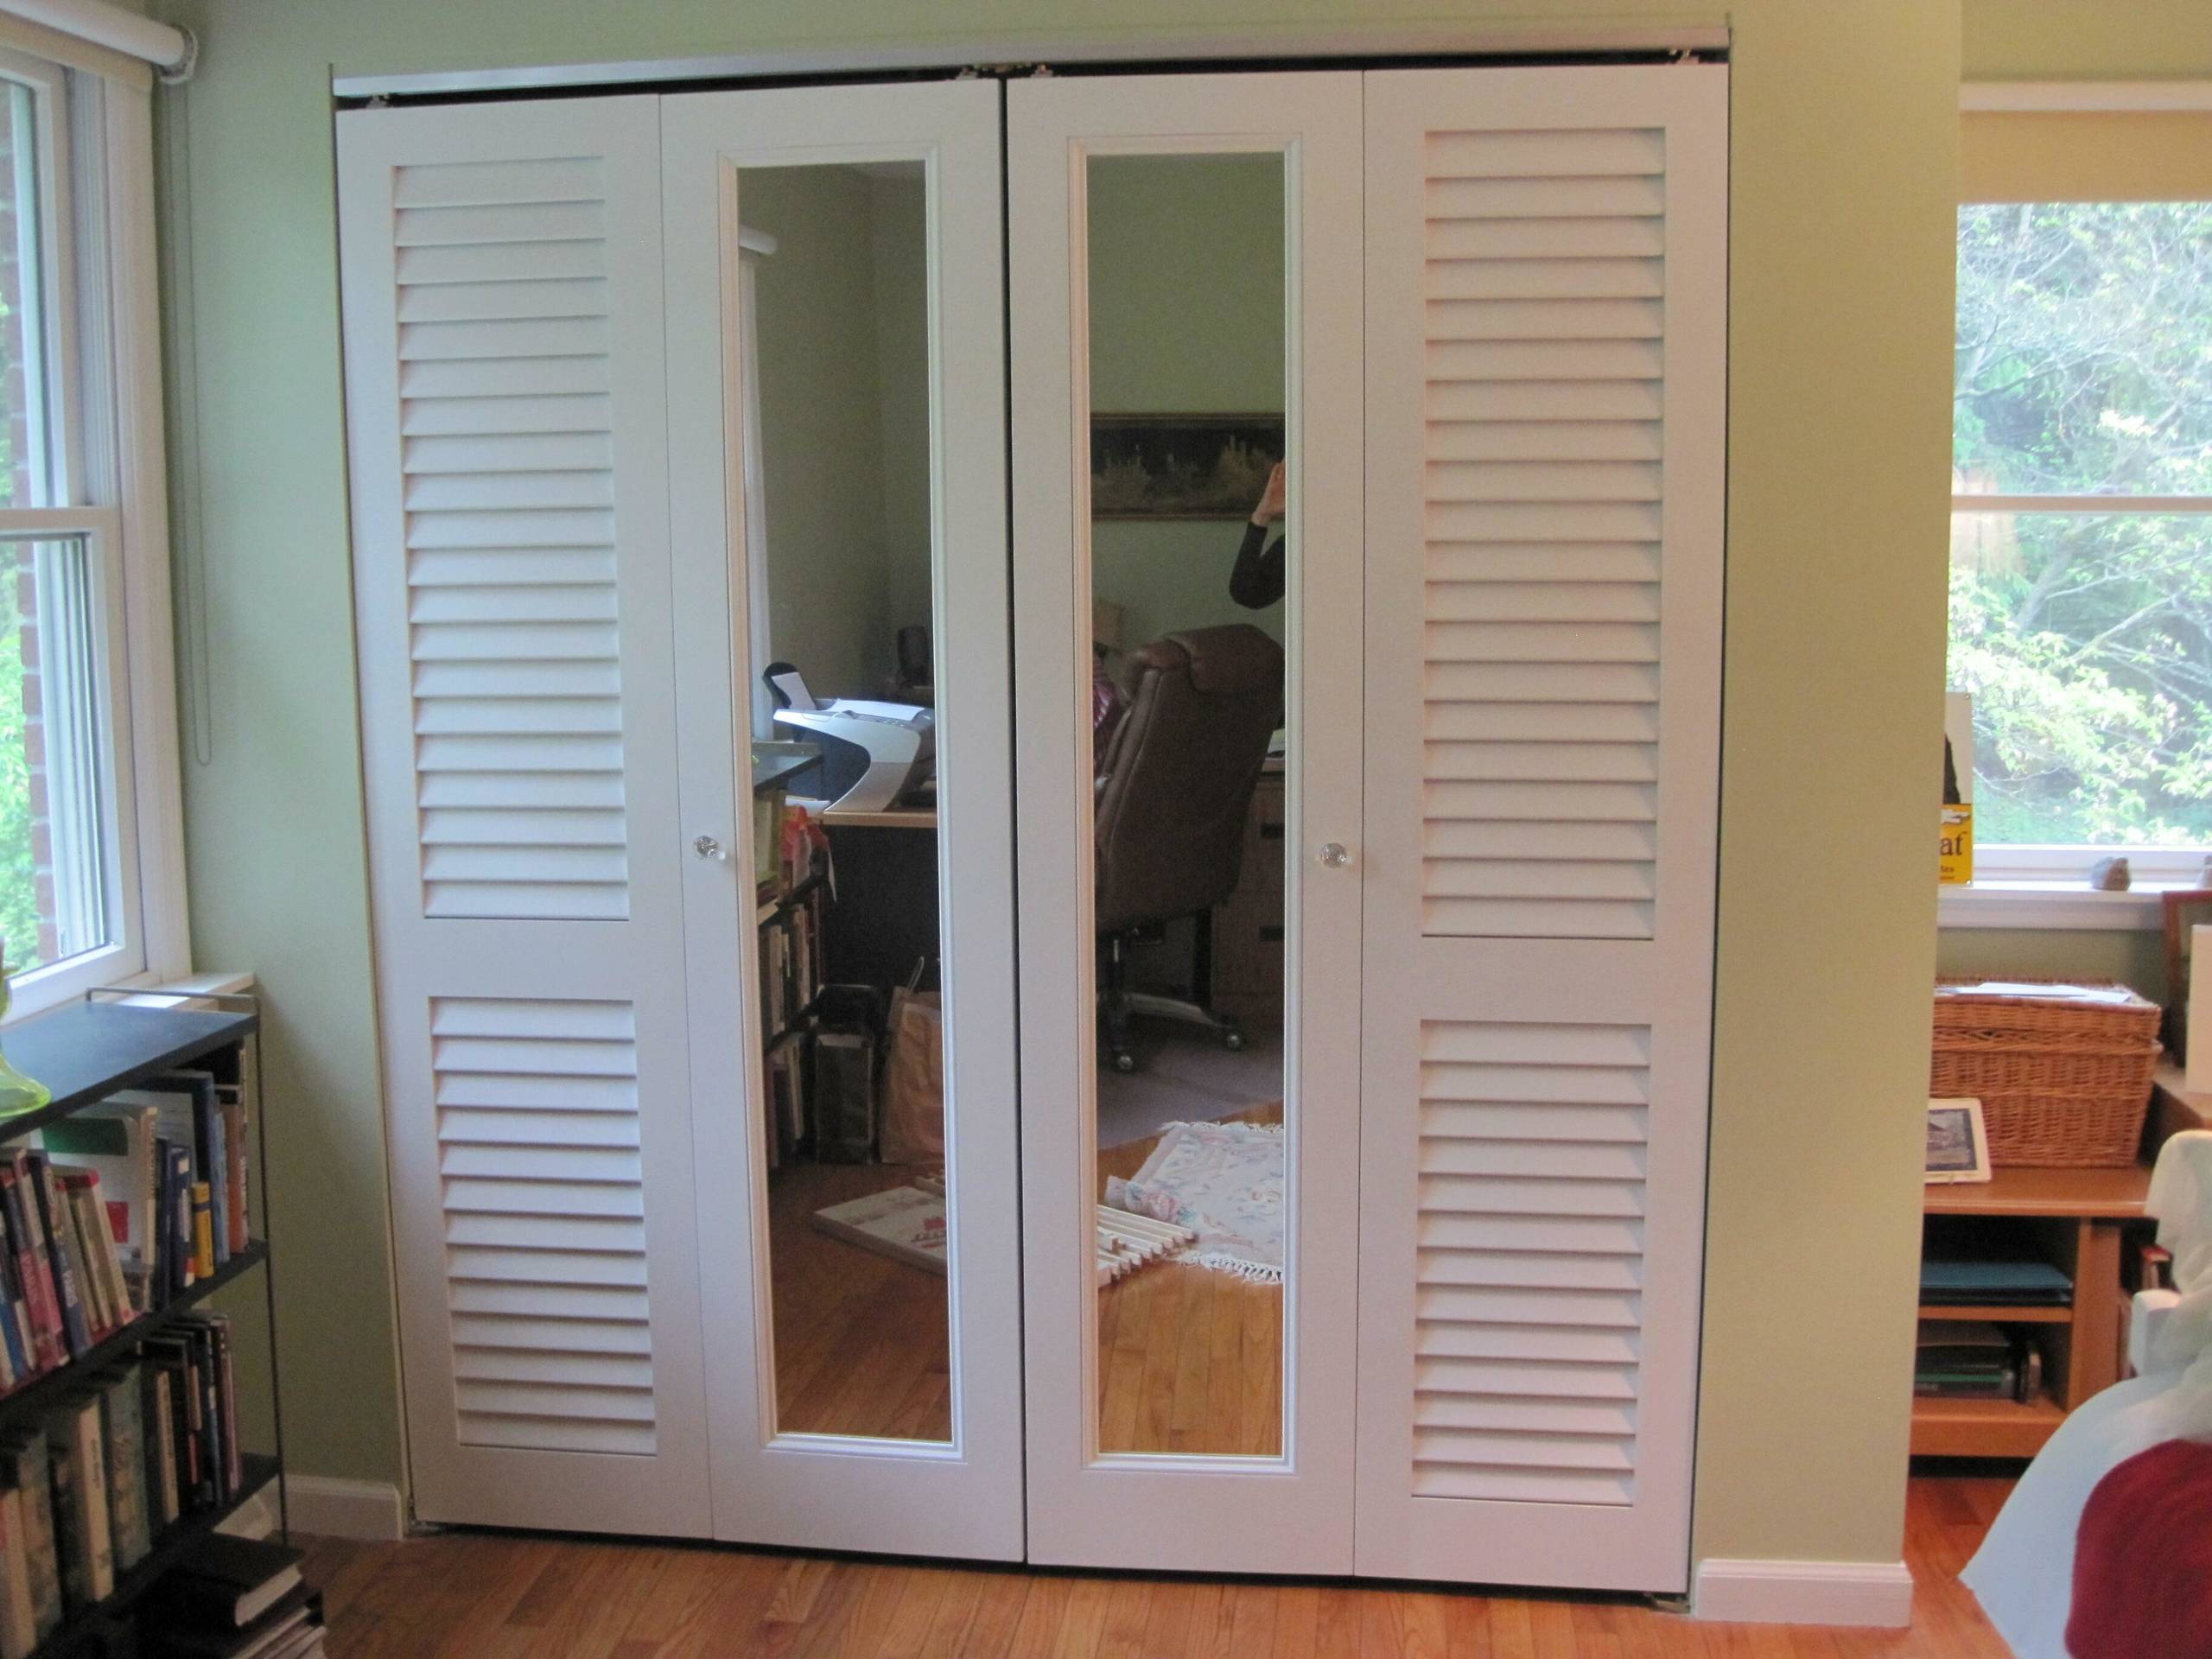 Mirror Closet Door Ideas Houzz, Are Mirrored Closet Doors Out Of Style 2018